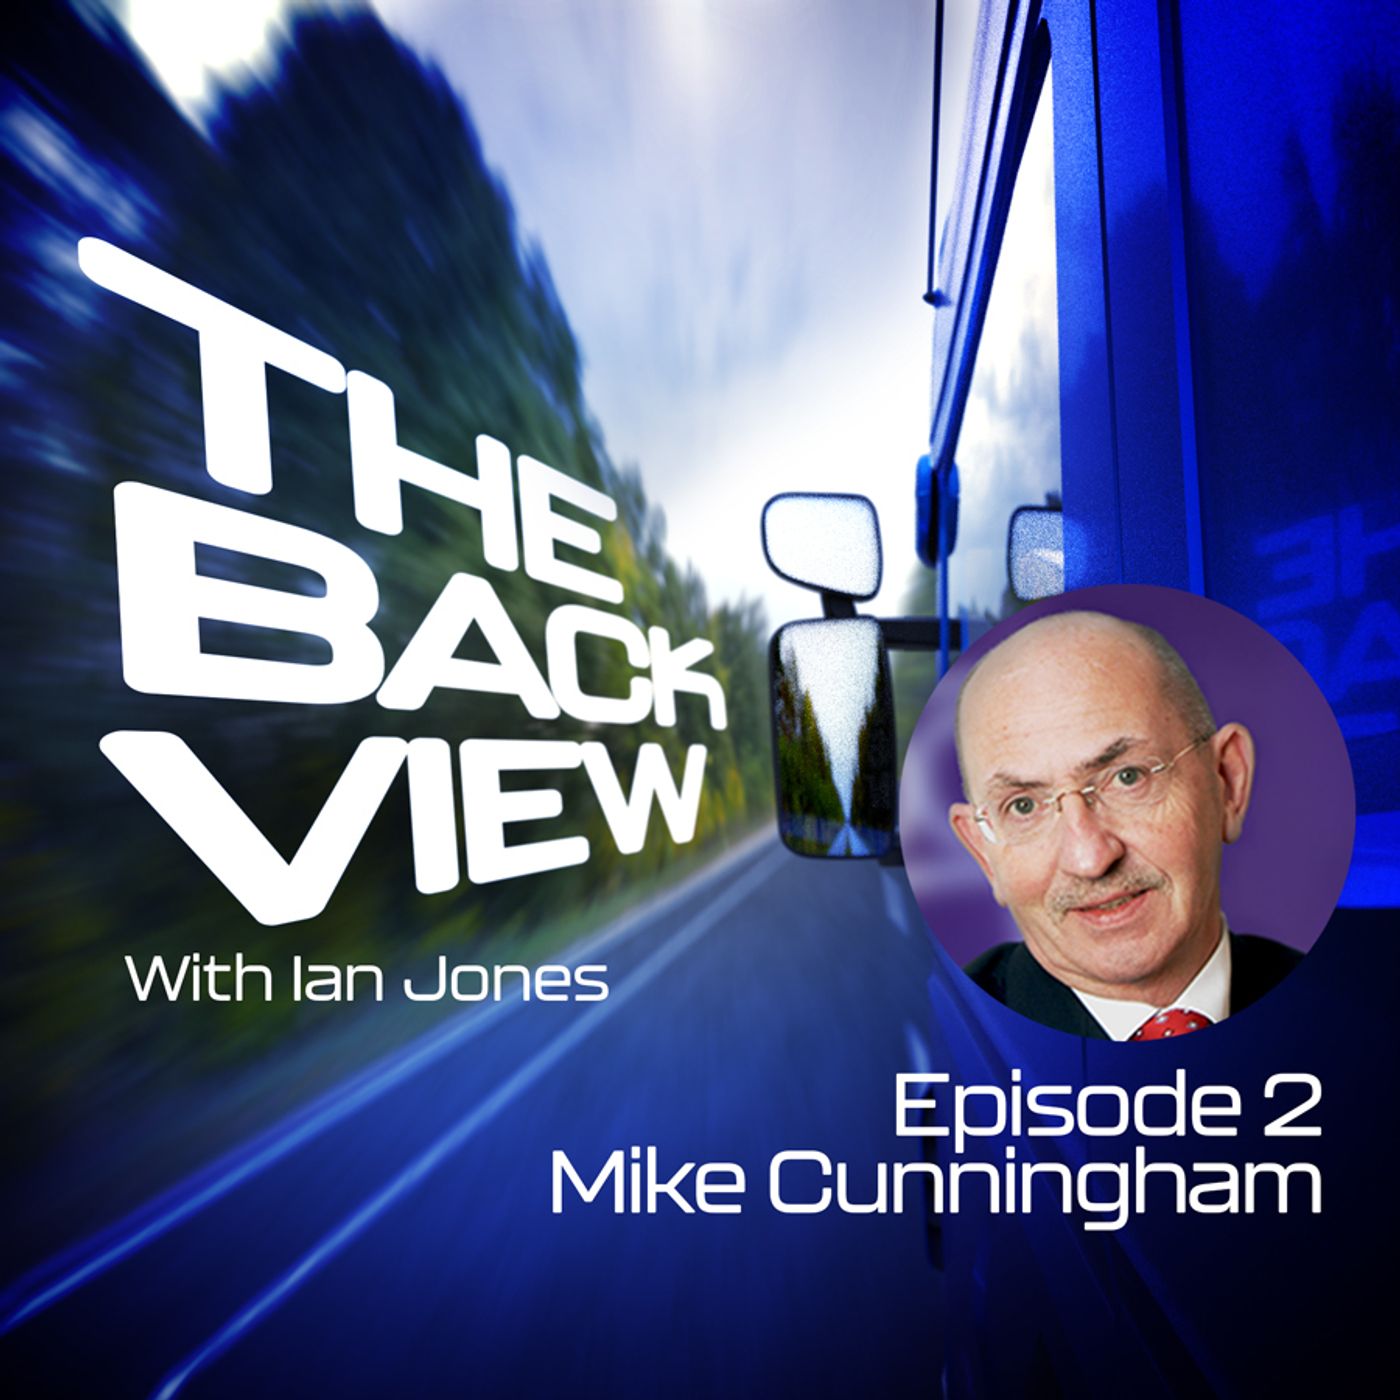 2: The Back View episode 2 - Mike Cunningham